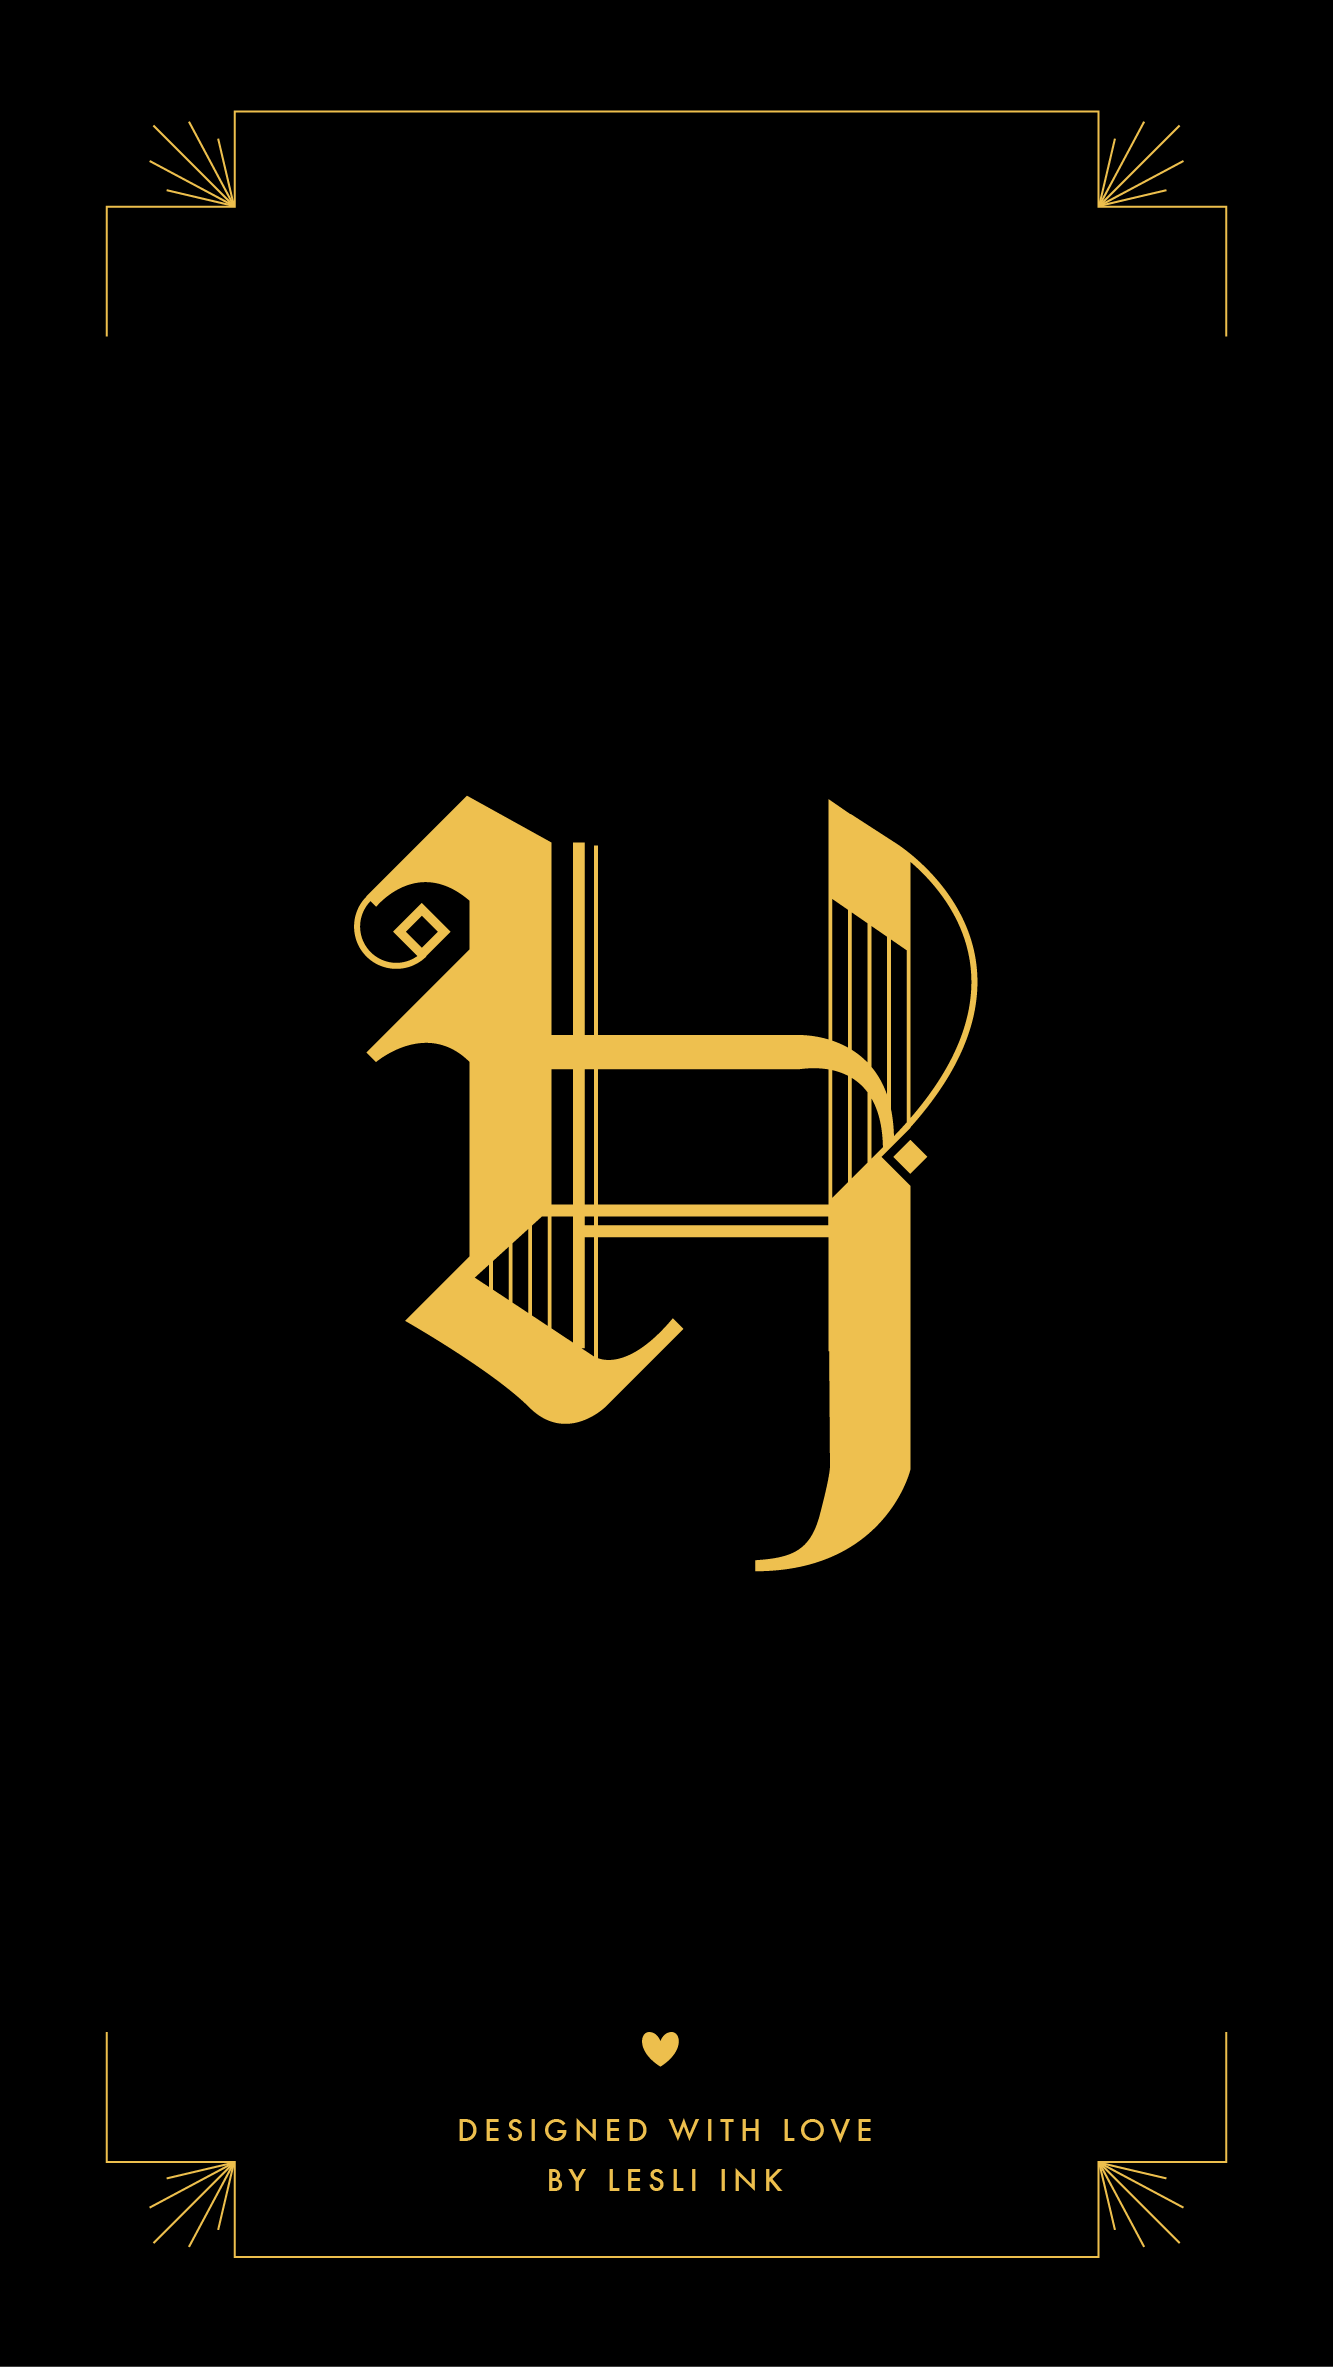 100+] Letter H Wallpapers | Wallpapers.com